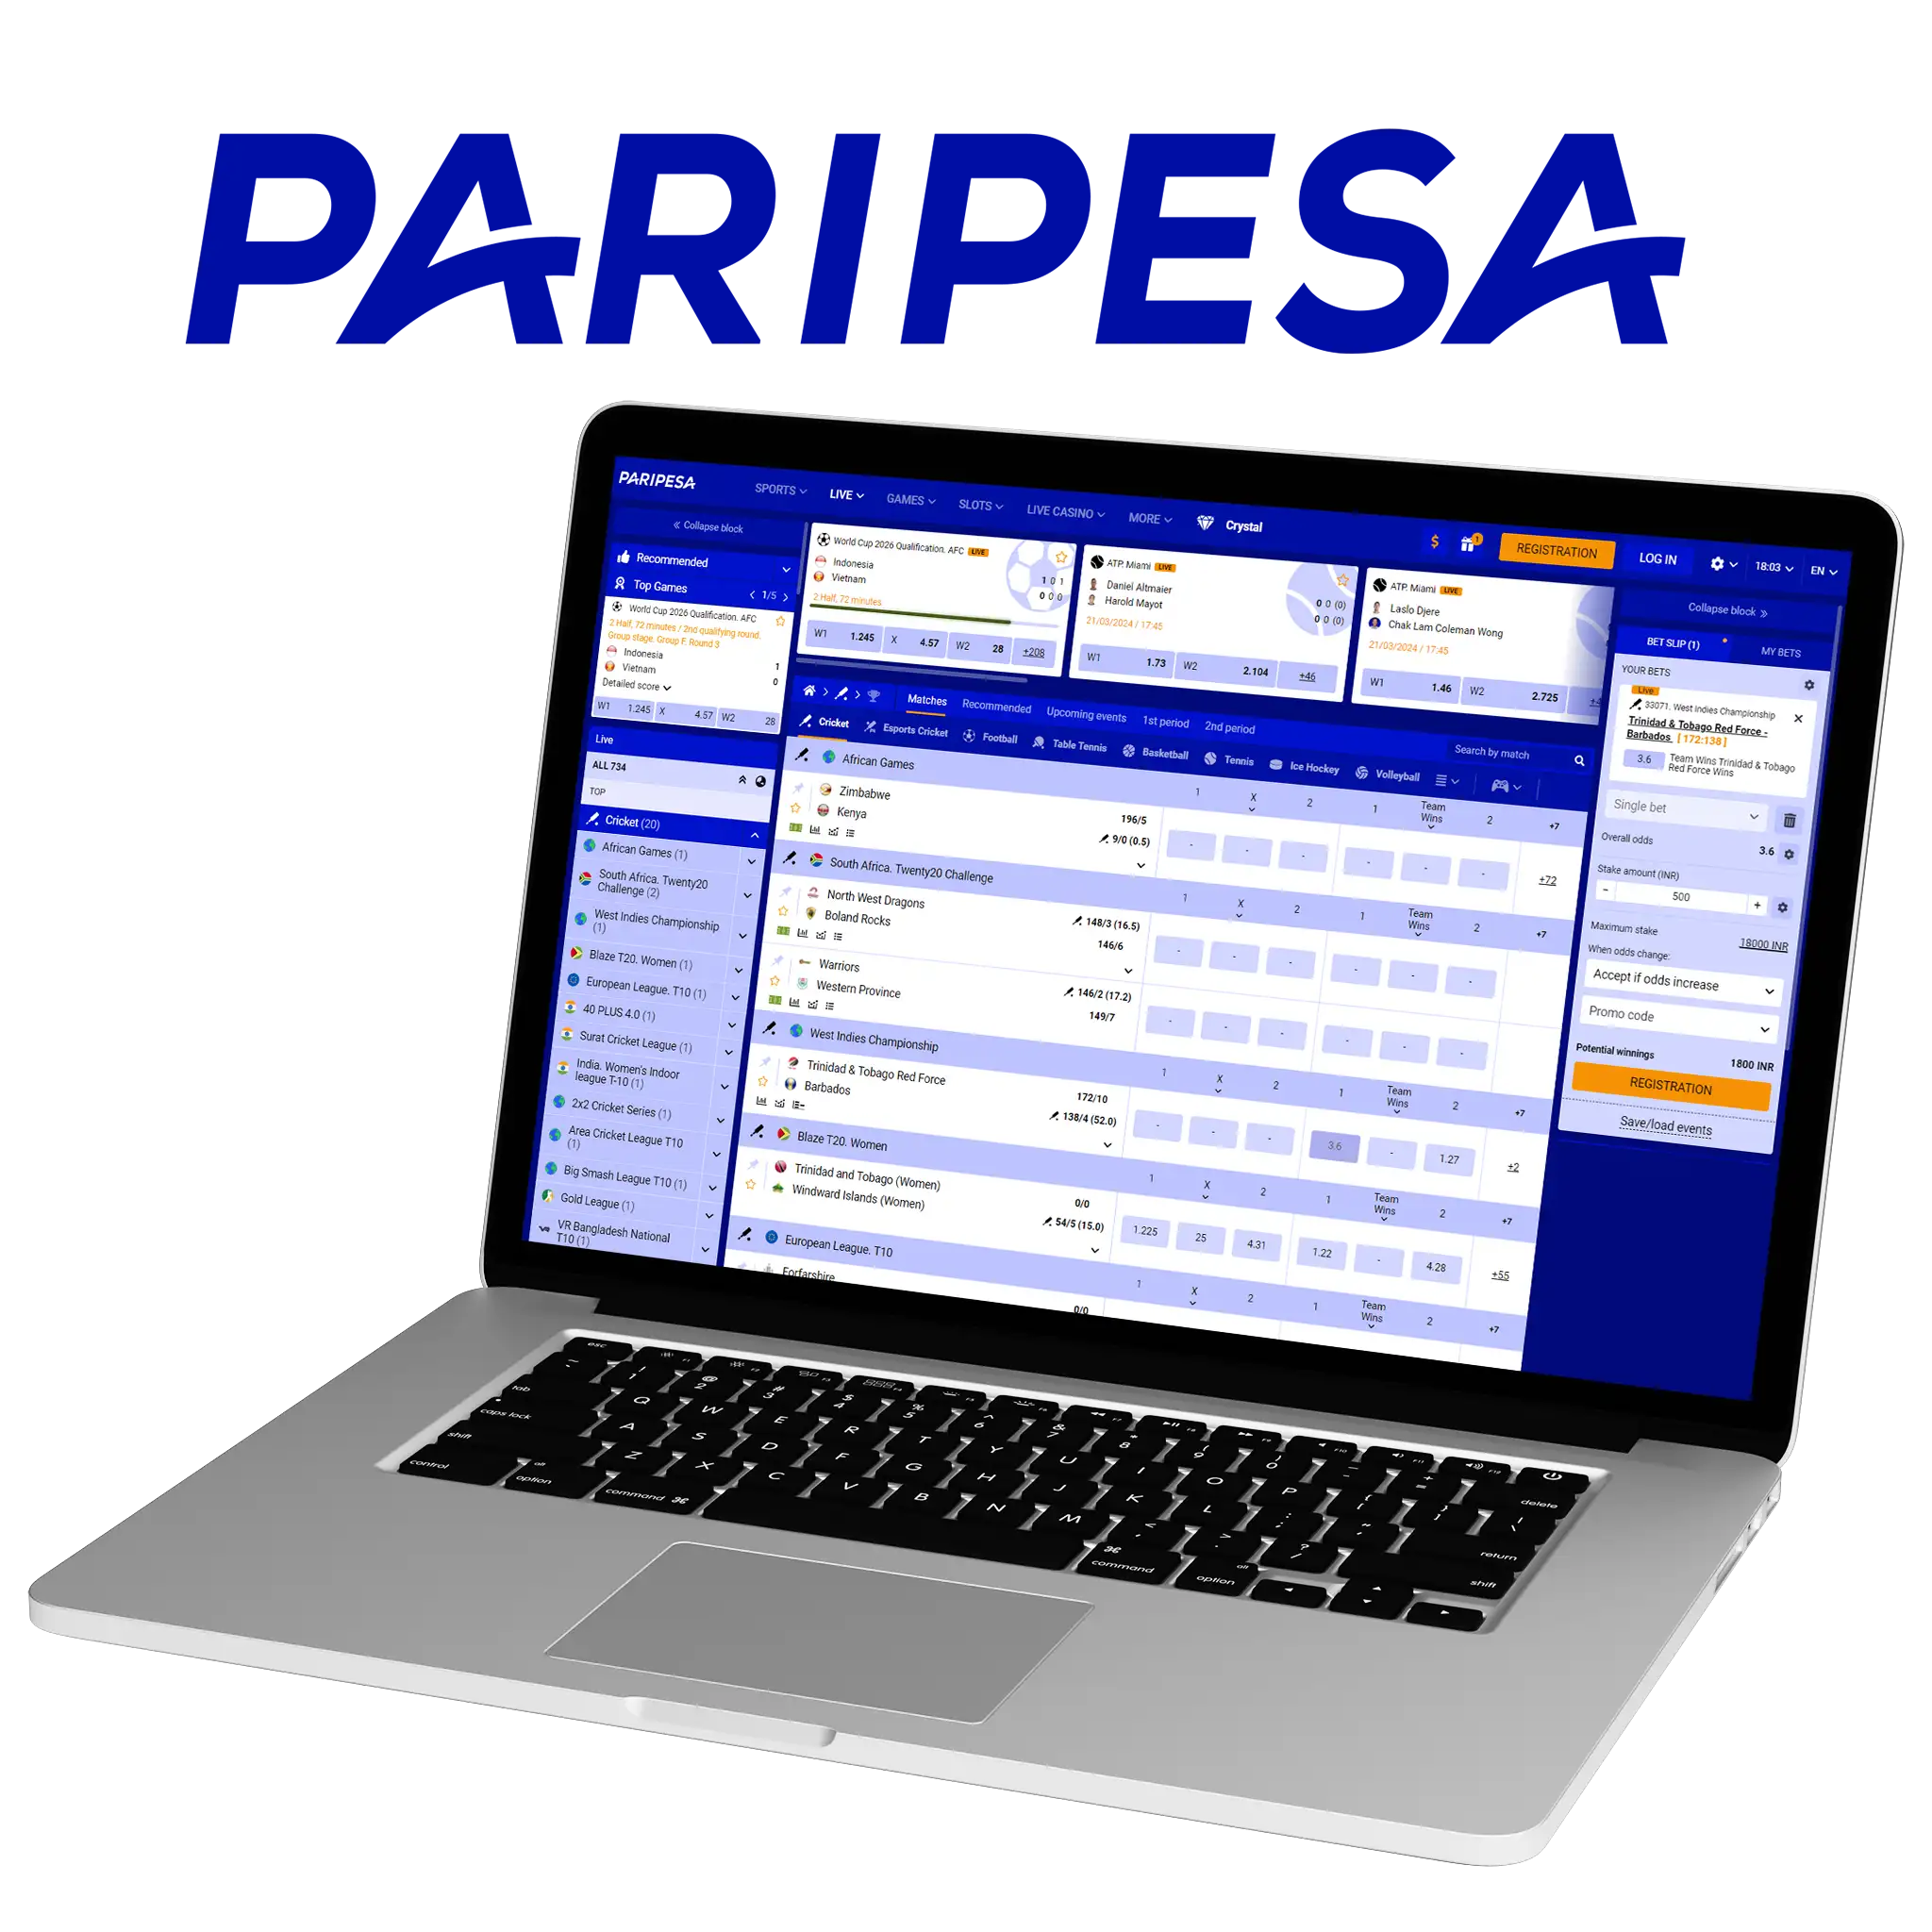 Using Paripesa guarantees safe bets, impressive winnings and nice impressions for everyone.